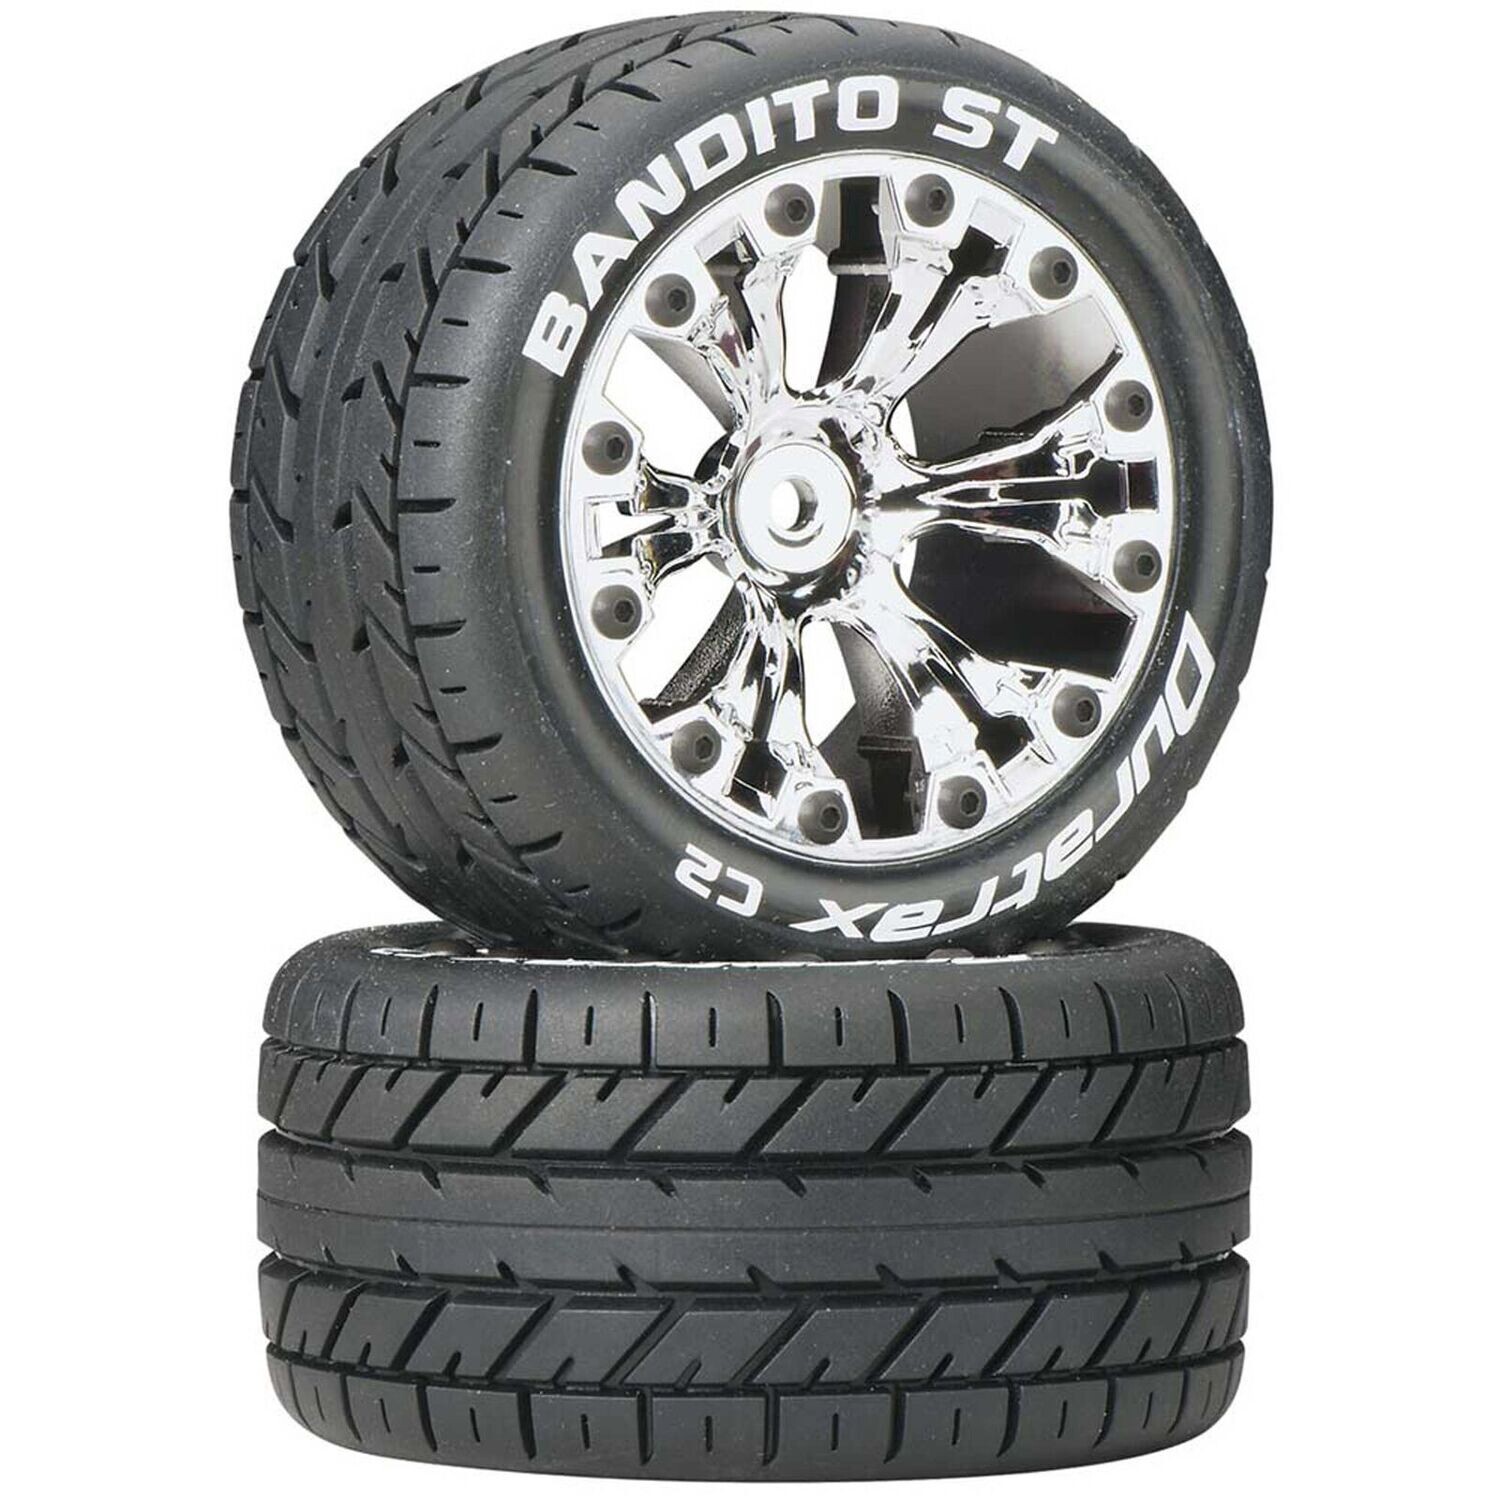 DuraTrax Bandito ST 2.8" Mounted 2WD Rear Truck Tires (Chrome) (2)